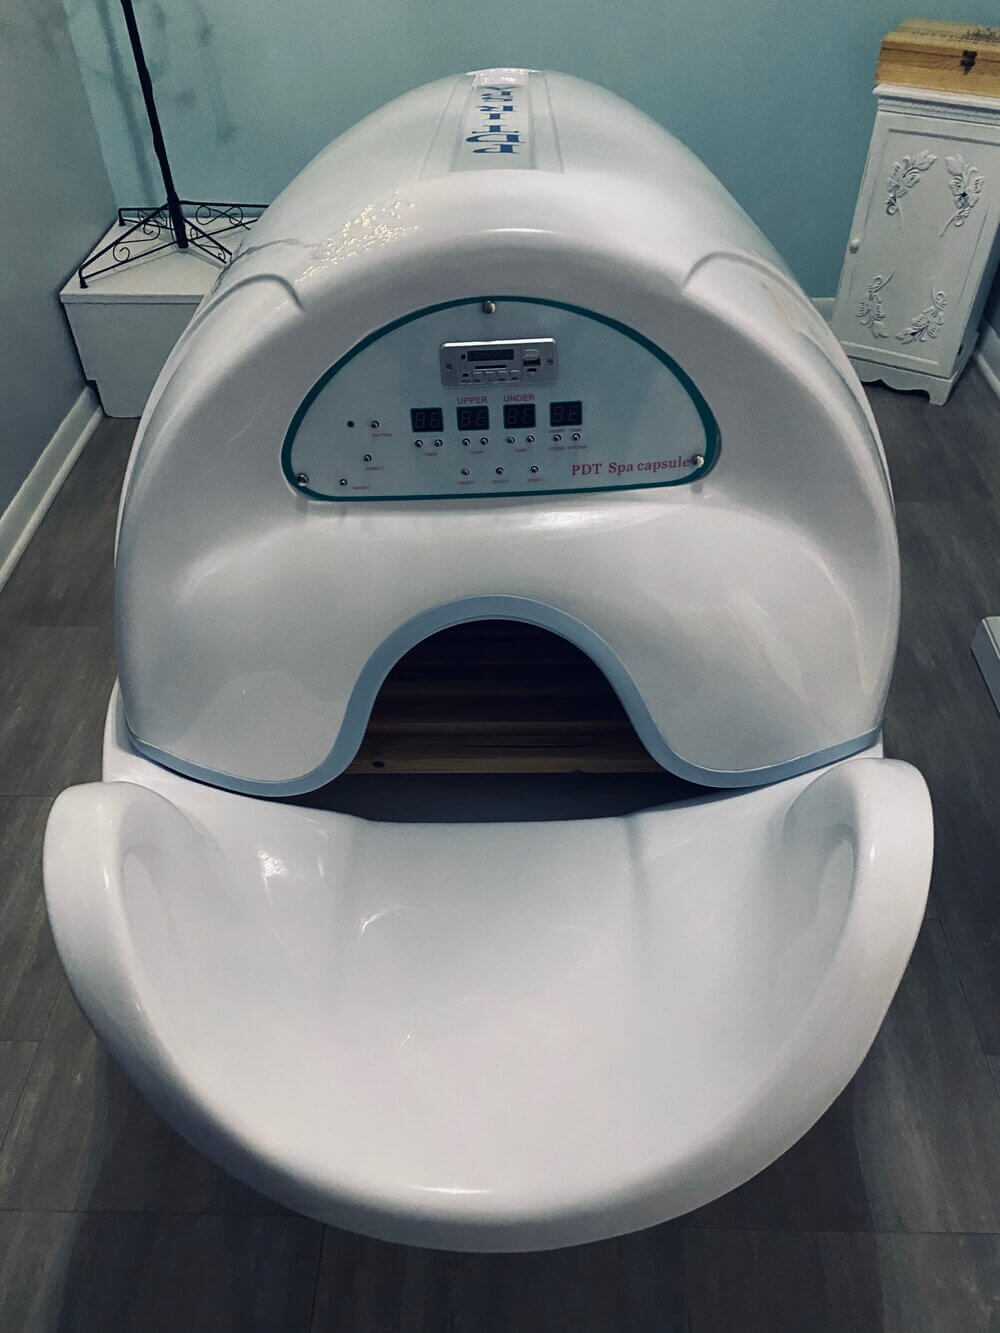 What SPA Capsules procedure models are profitable to install in beauty salons?